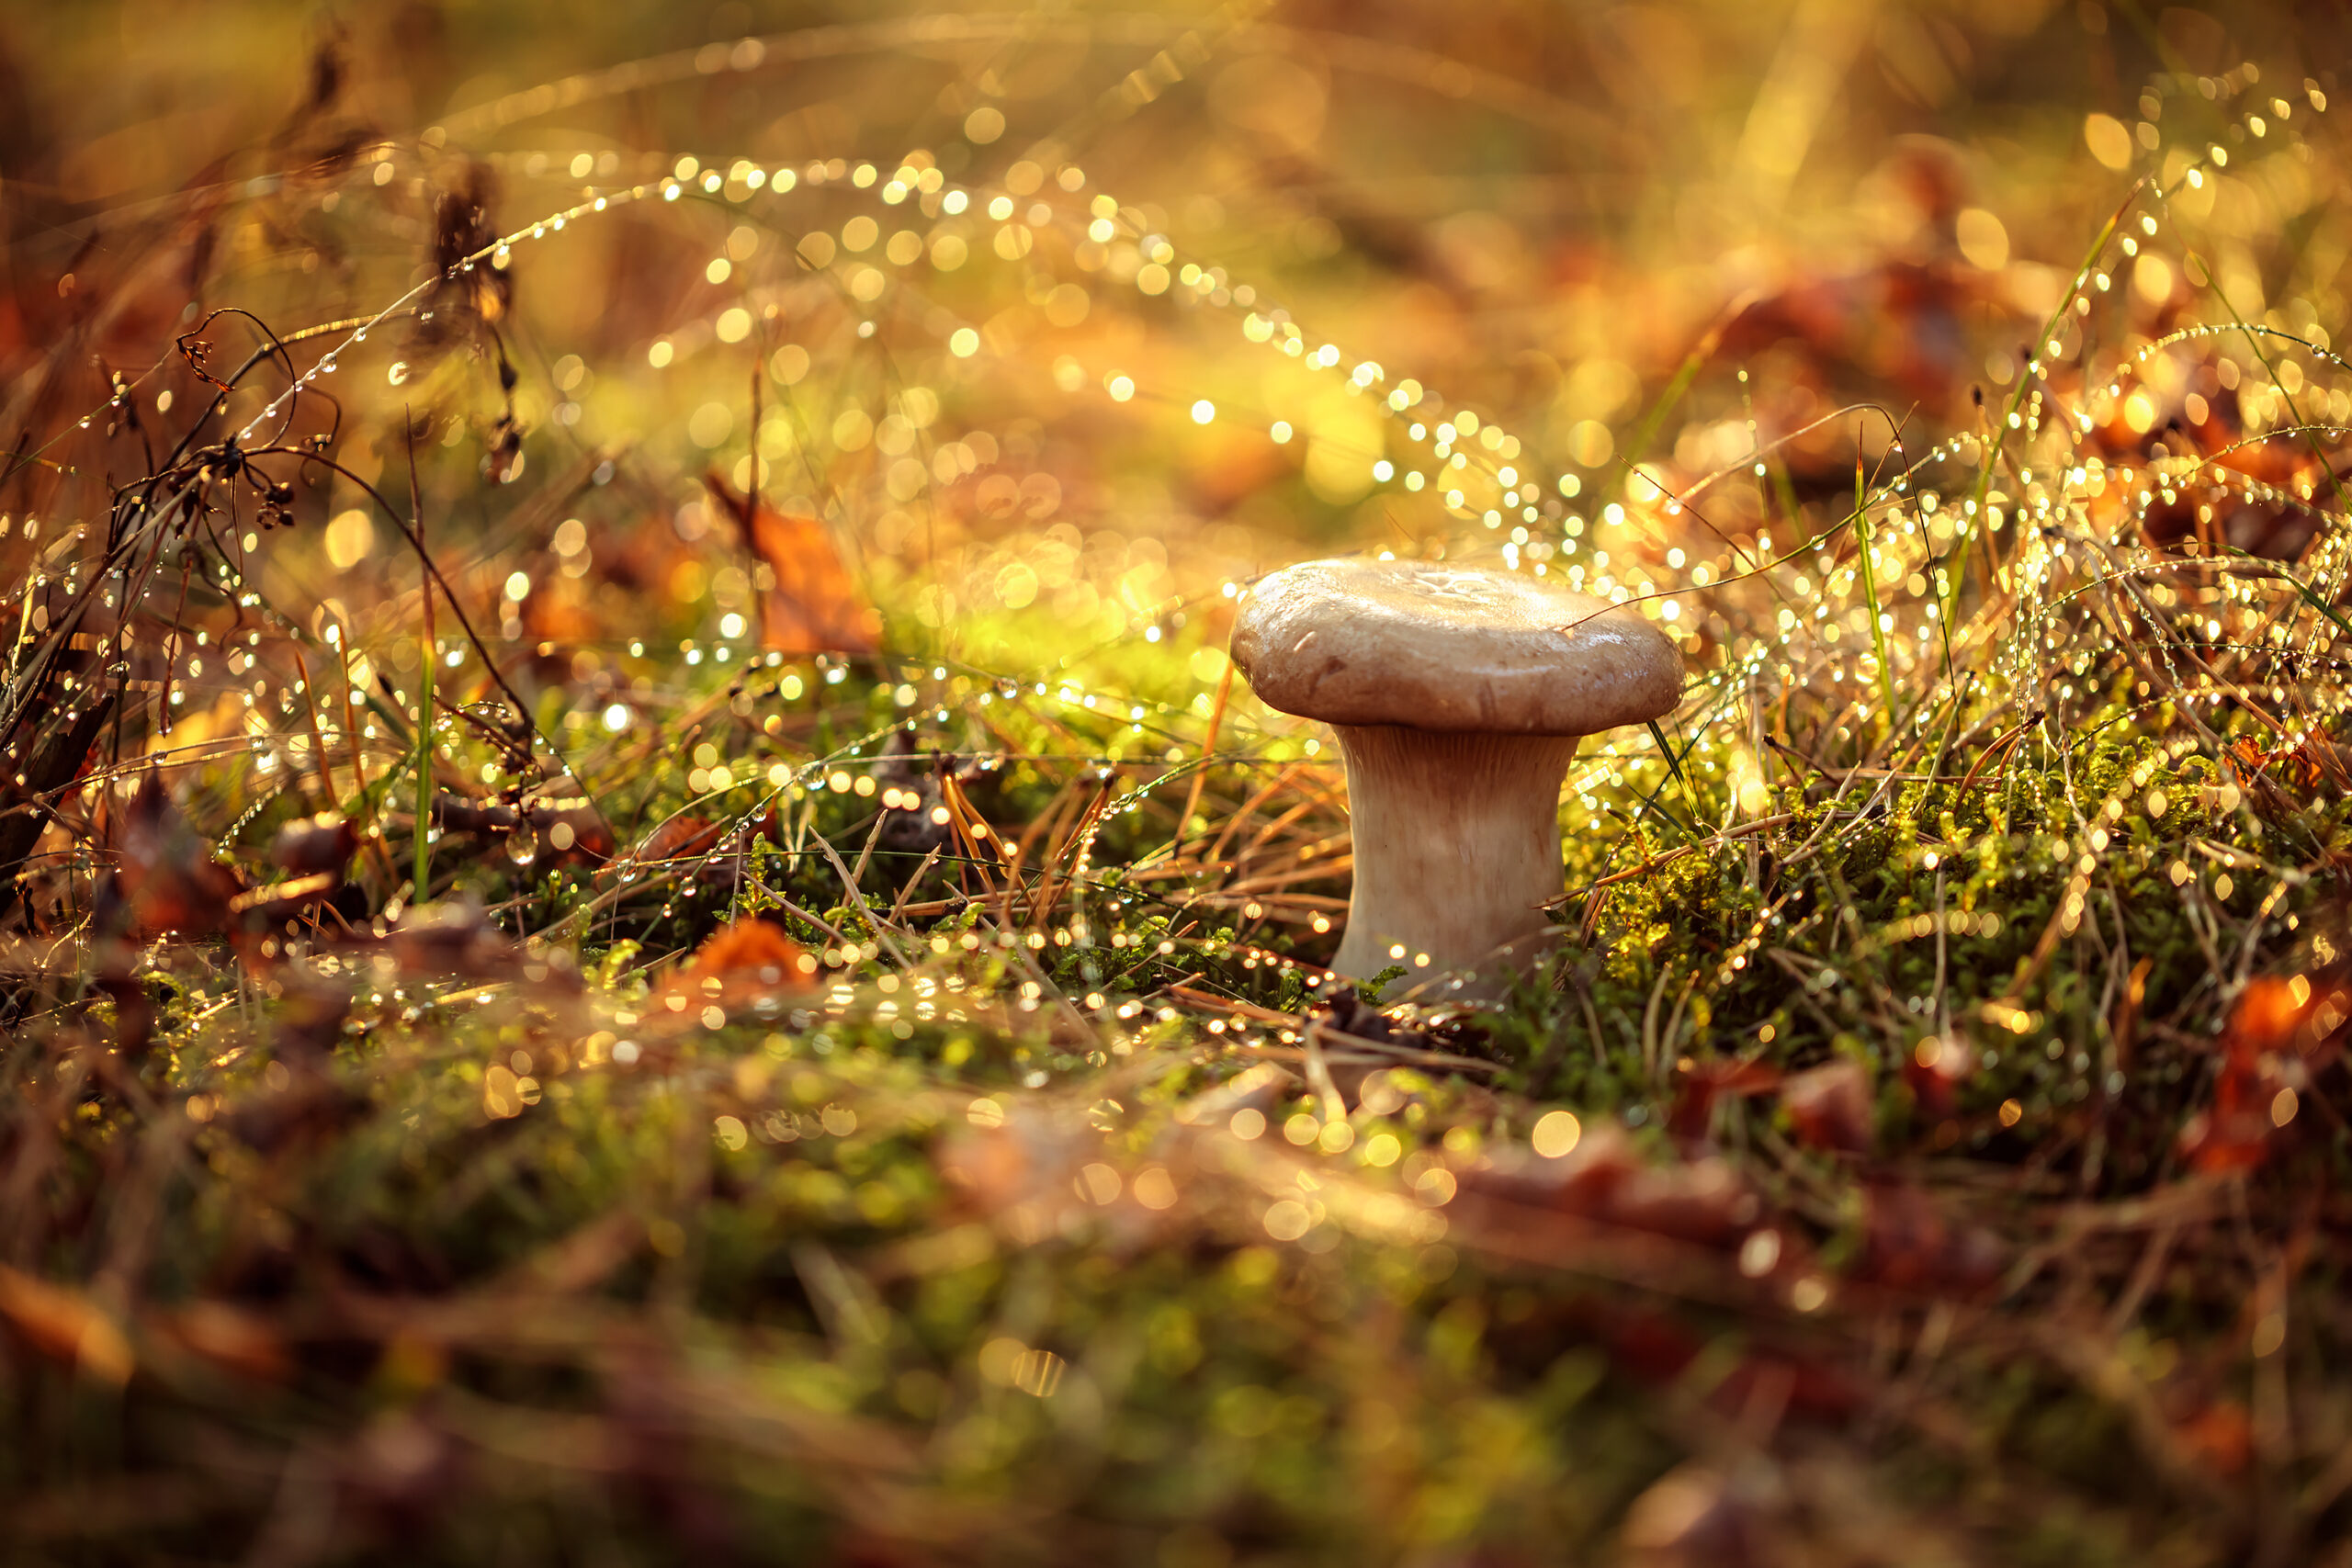 mushroom boletus in a sunny forest in the rain 2022 02 02 03 48 24 utc scaled Mushroom-Based Pesticide Could Make Chemical Pesticides Obsolete